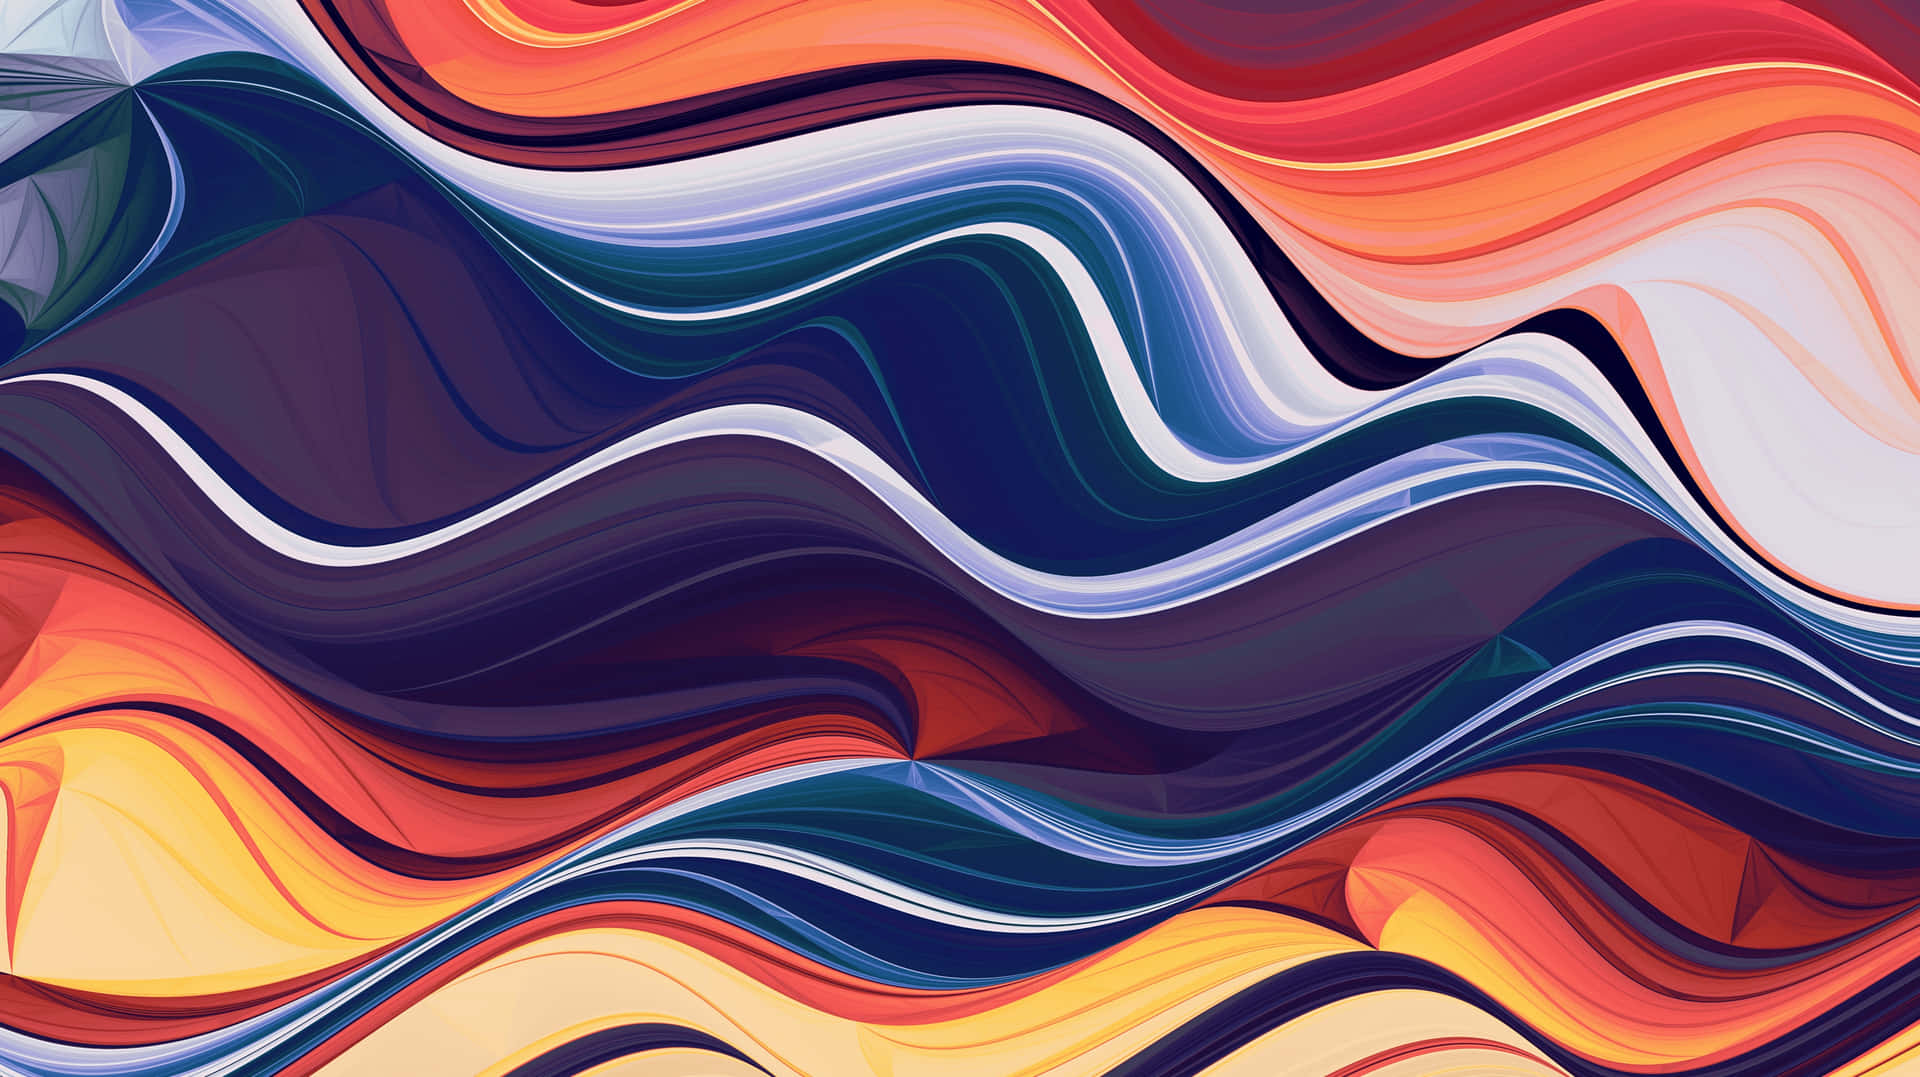 "liven Up Your Space With Colorful Abstract Art" Wallpaper